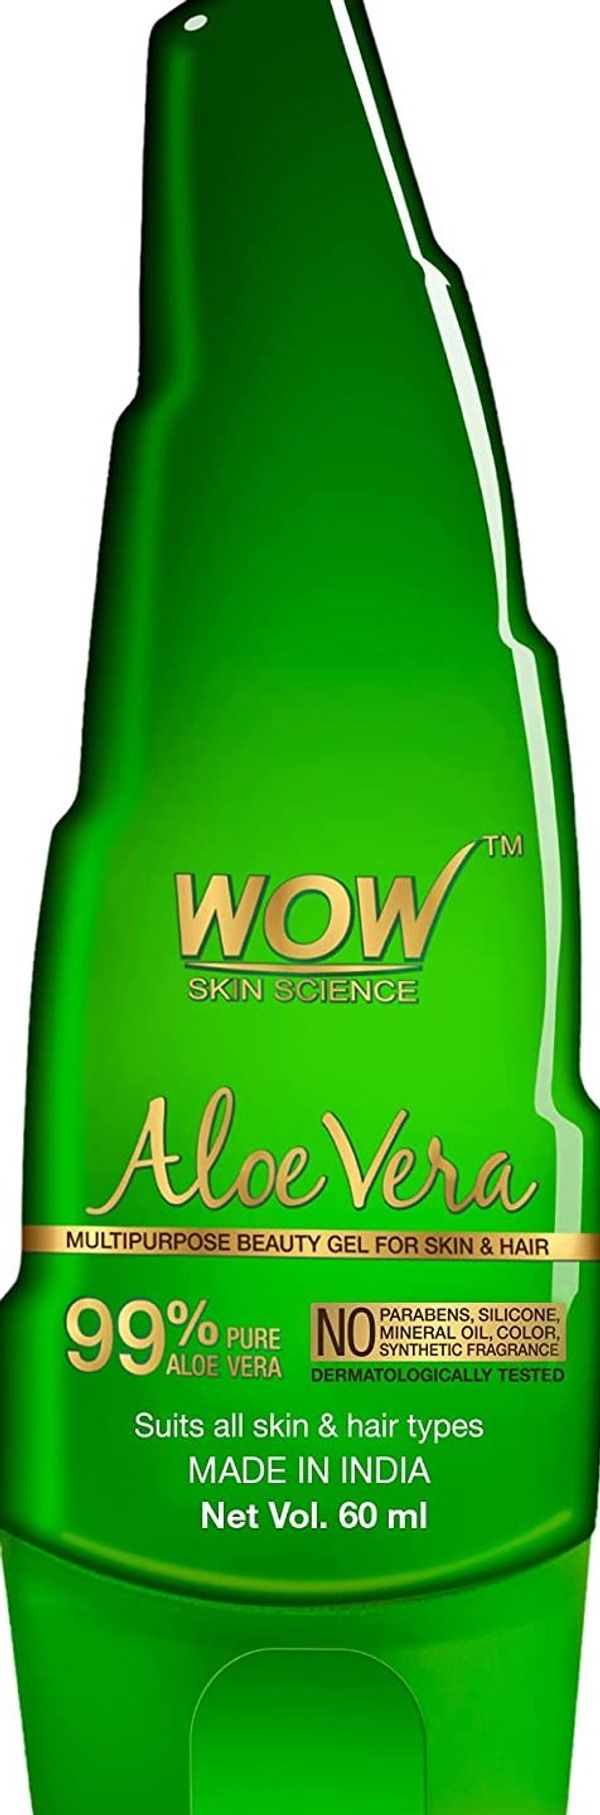 WOW Skin Science 99% Pure Aloe Vera Gel - Ultimate for Skin and Hair - - WOW Skin Science 99% Pure Aloe Vera Gel - Ultimate for Skin and Hair - No Parabens, Silicones, Mineral Oil, Color, Synthetic Fragrance- 60mL